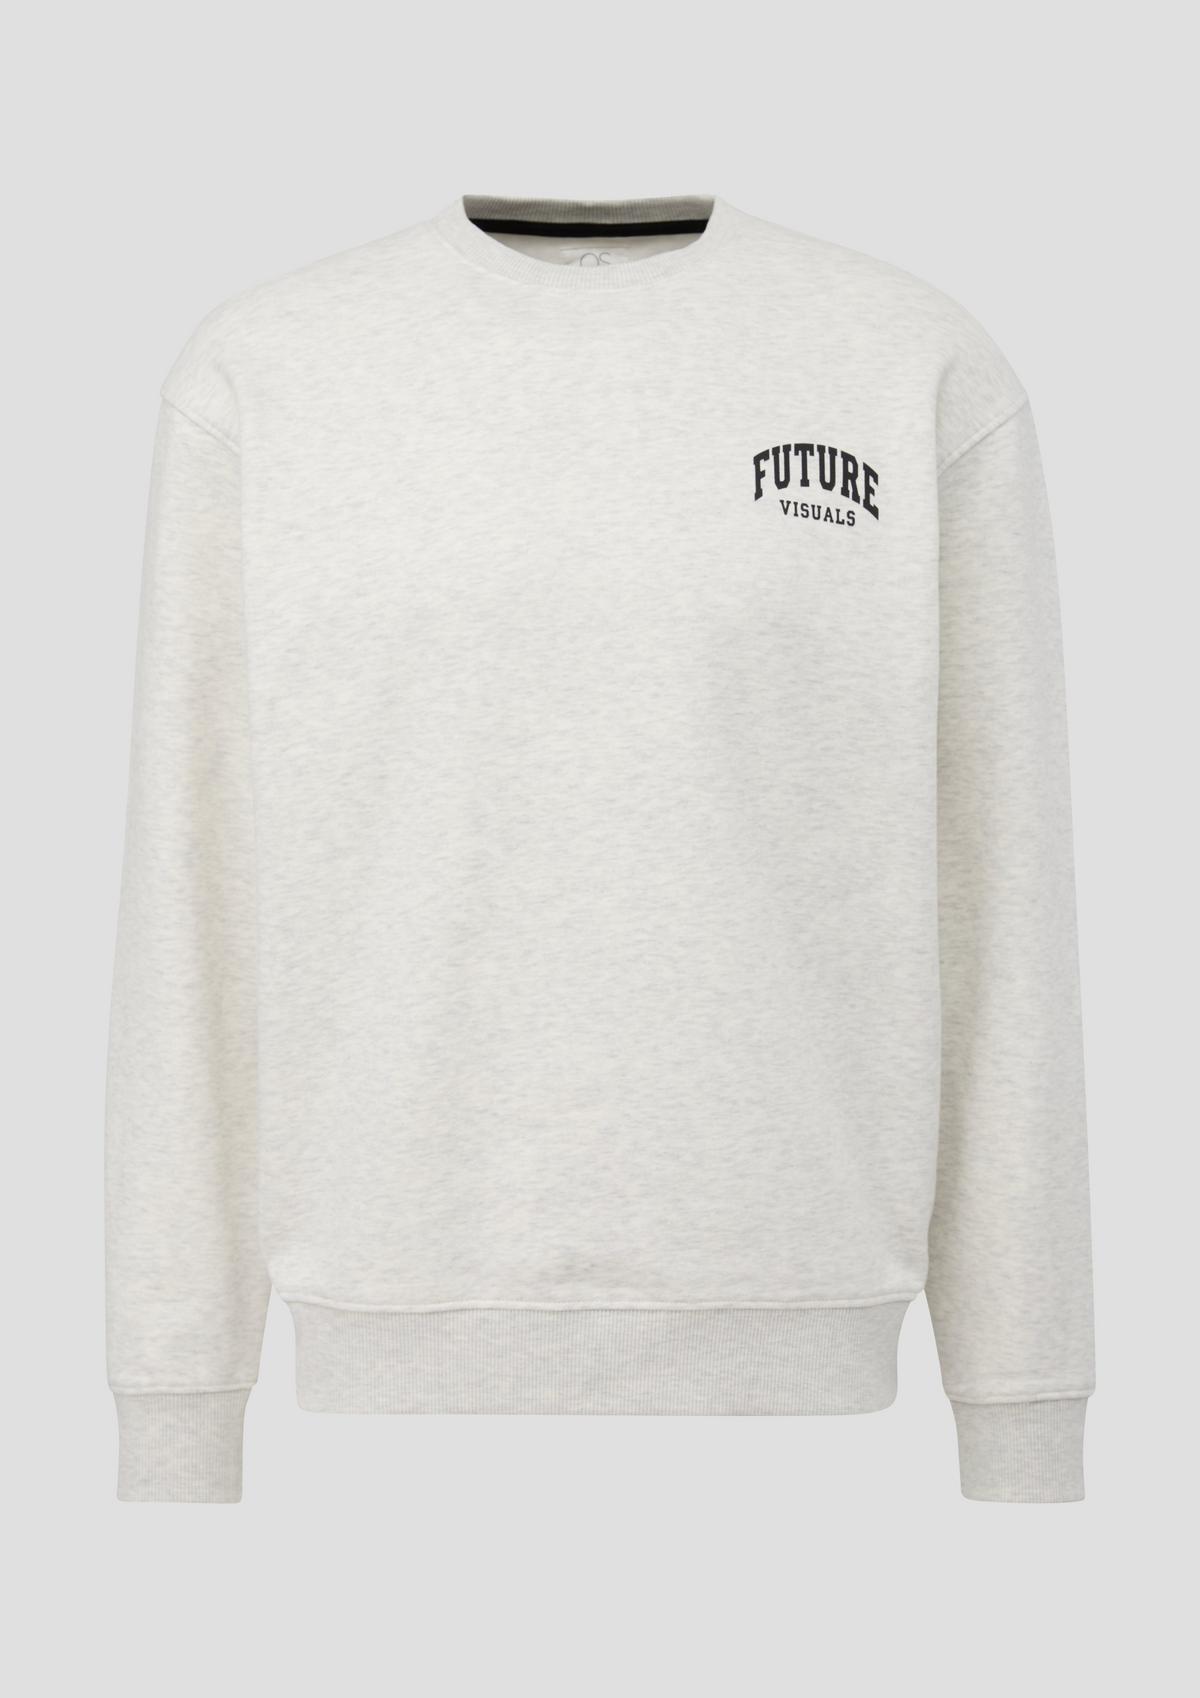 s.Oliver Sweatshirt with a large back print